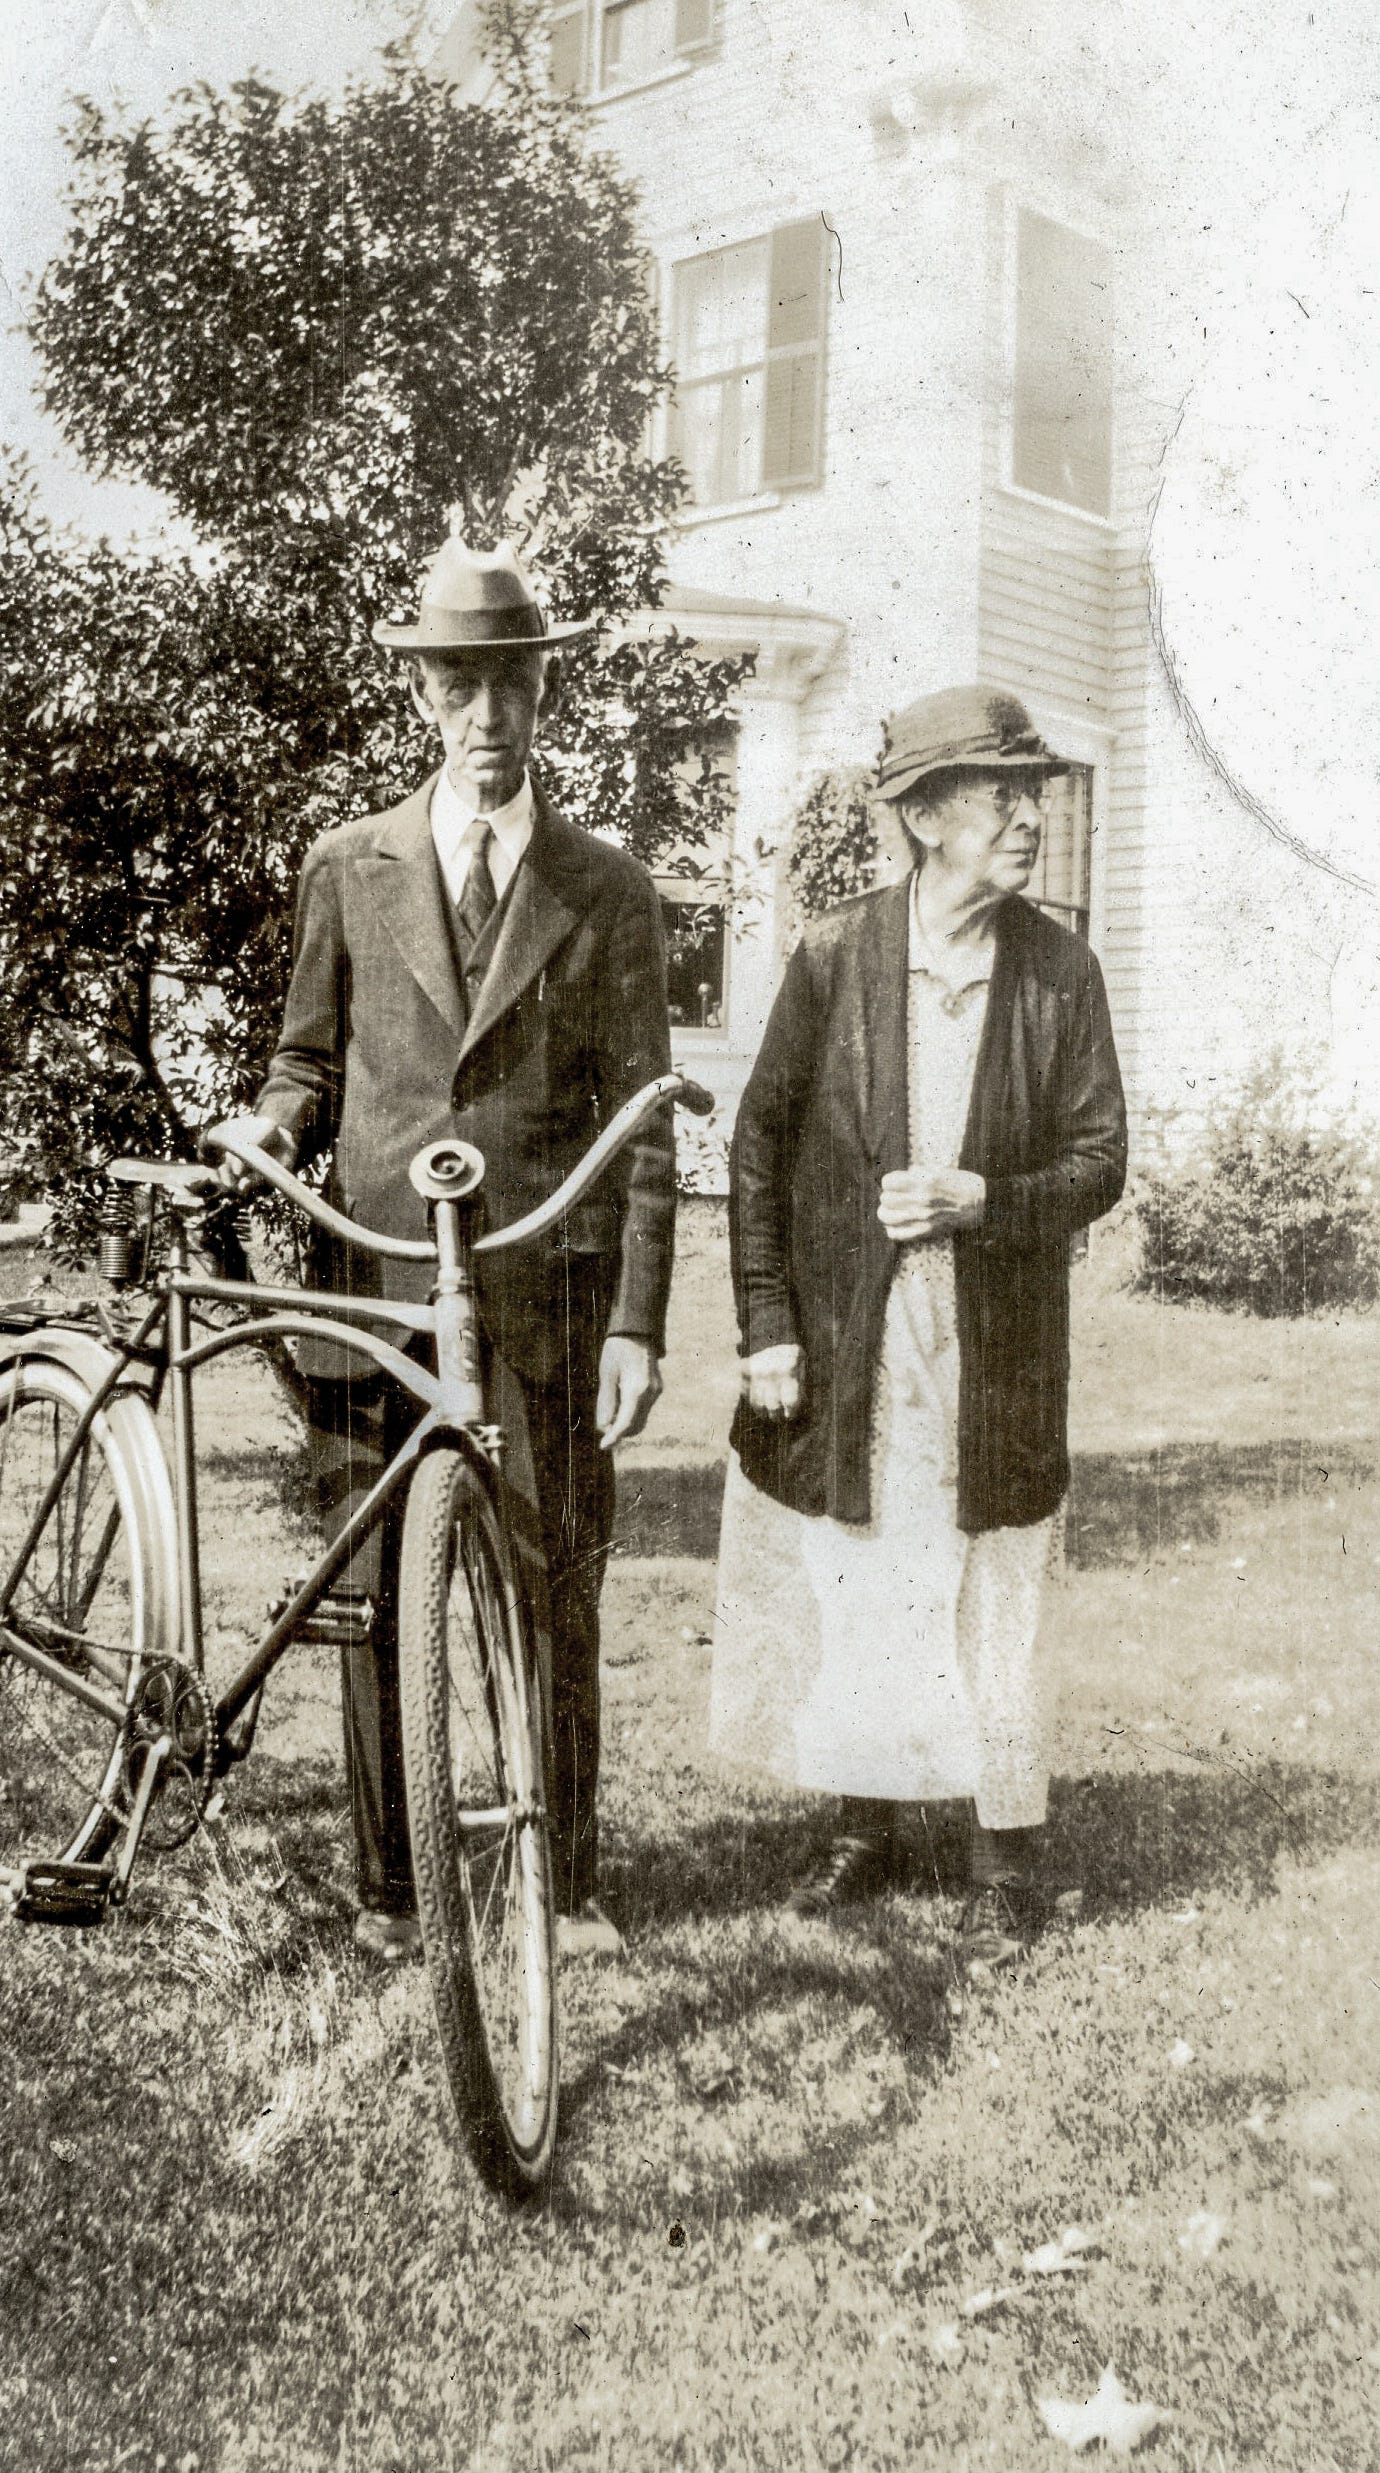 Man with bike and his wife